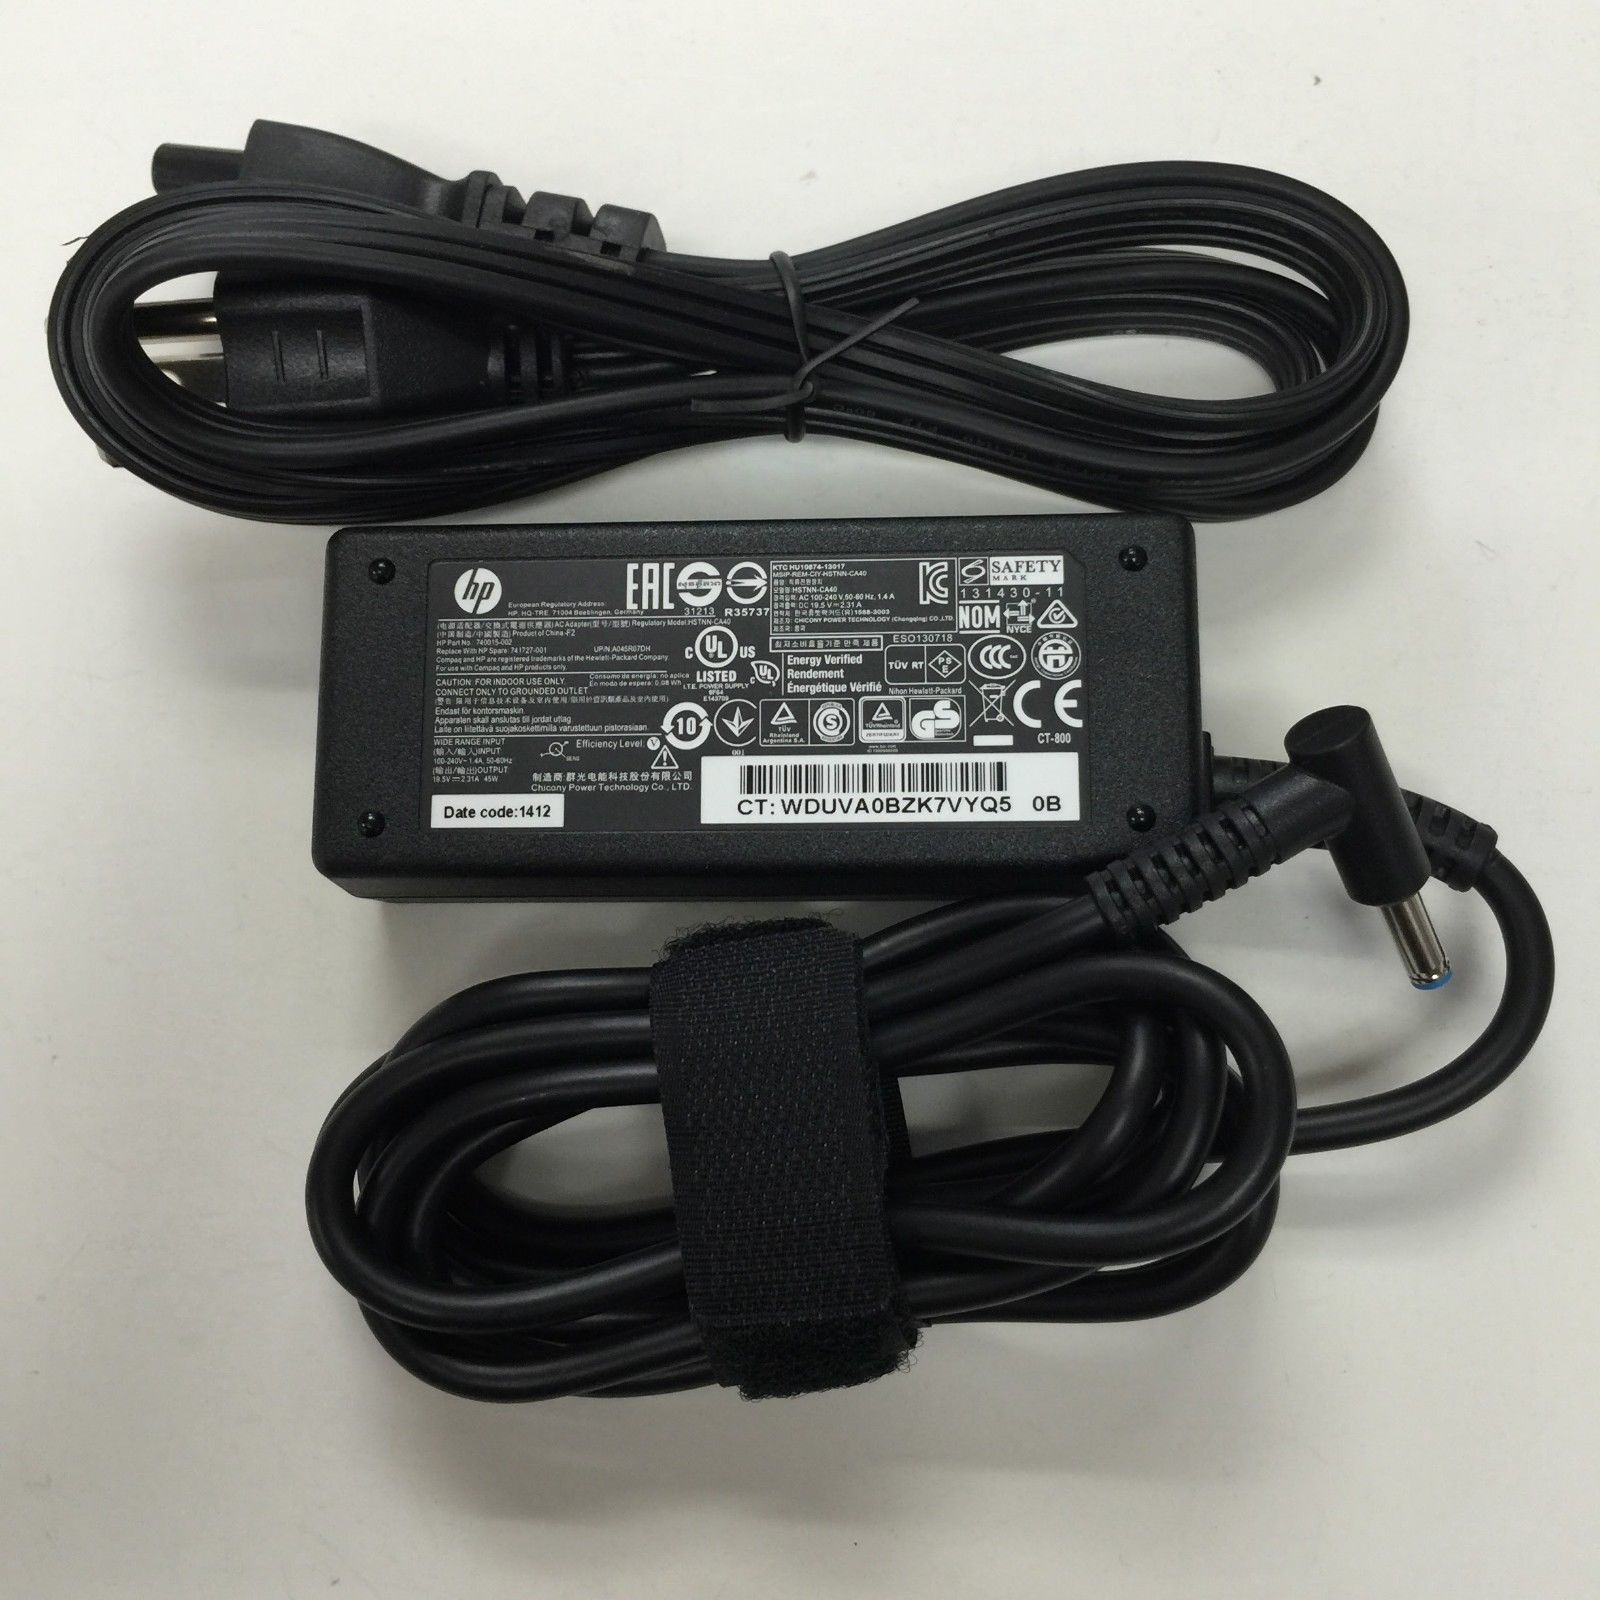 HP 15-DB0003DS AC Adapter Power Supply Cord Cable Charger Genuine Original